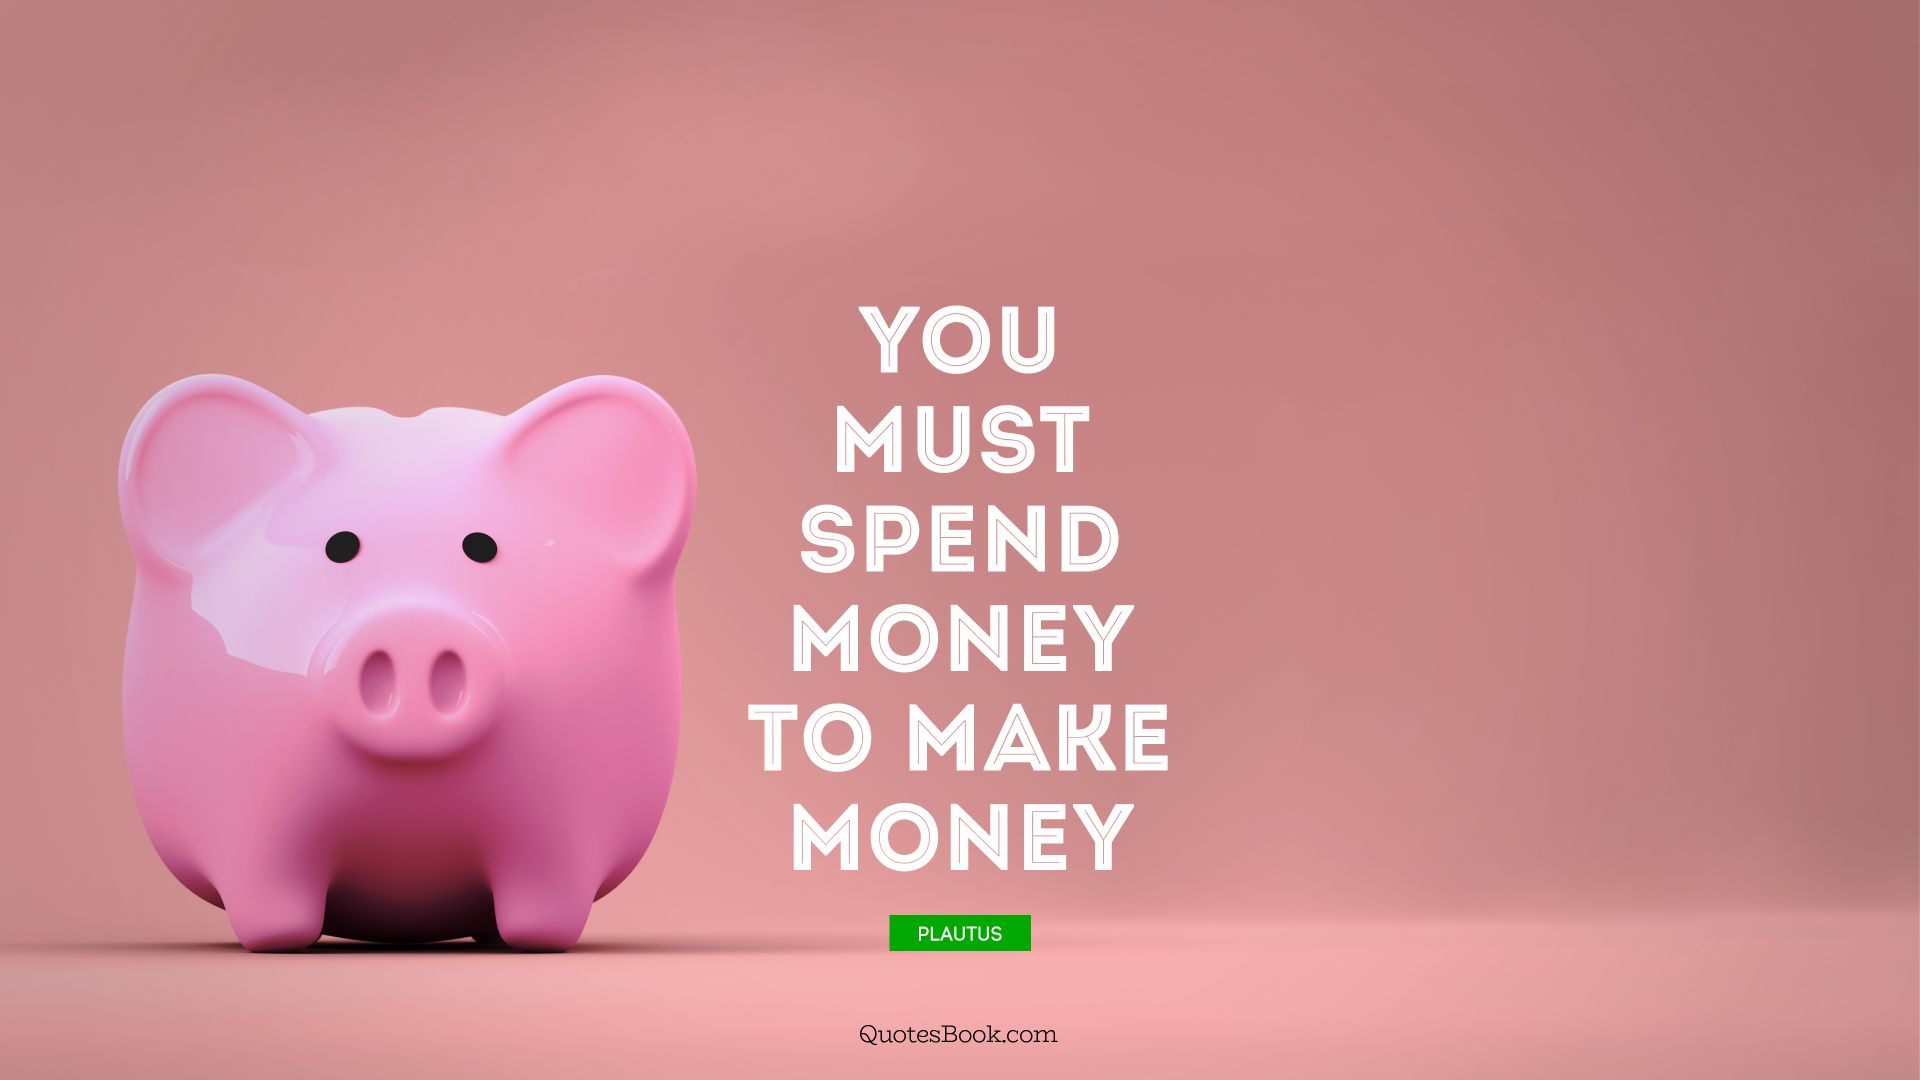 You must spend money to make money. - Quote by Plautus